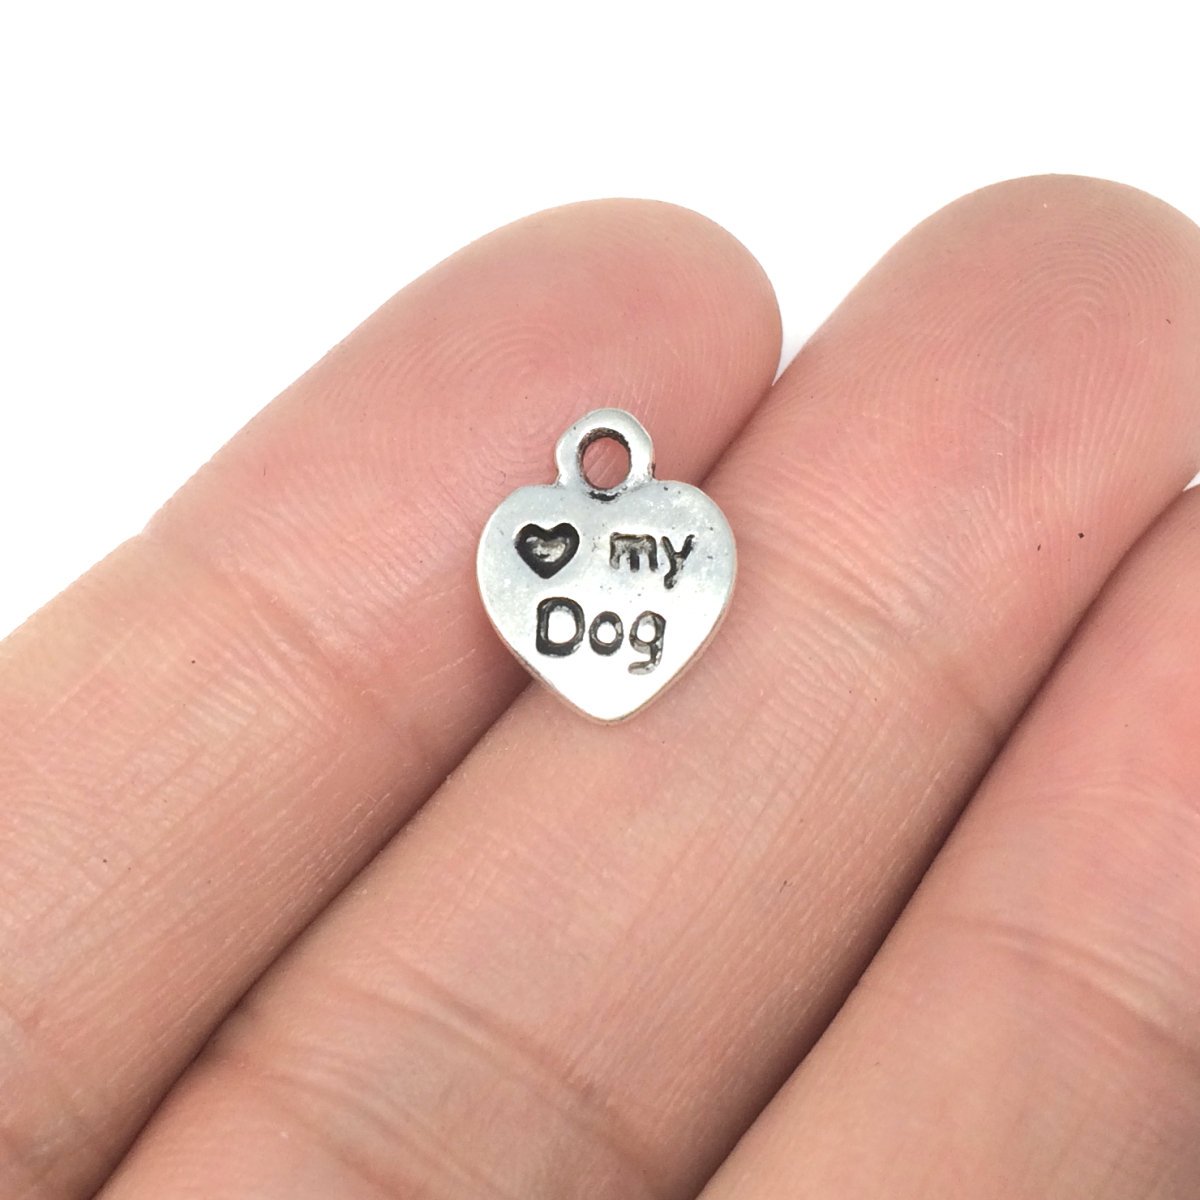 Excited to share the latest addition to my #etsy shop: 30pcs x I Love My Dog Charms 10mm Antique Silver Tone | Two Sided Charm Pendants #mcz1253 etsy.me/2QsVZUo #supplies #silver #beading #charms #bracelets #necklaces #charmsfornecklace #charmsforbracelet #jewe